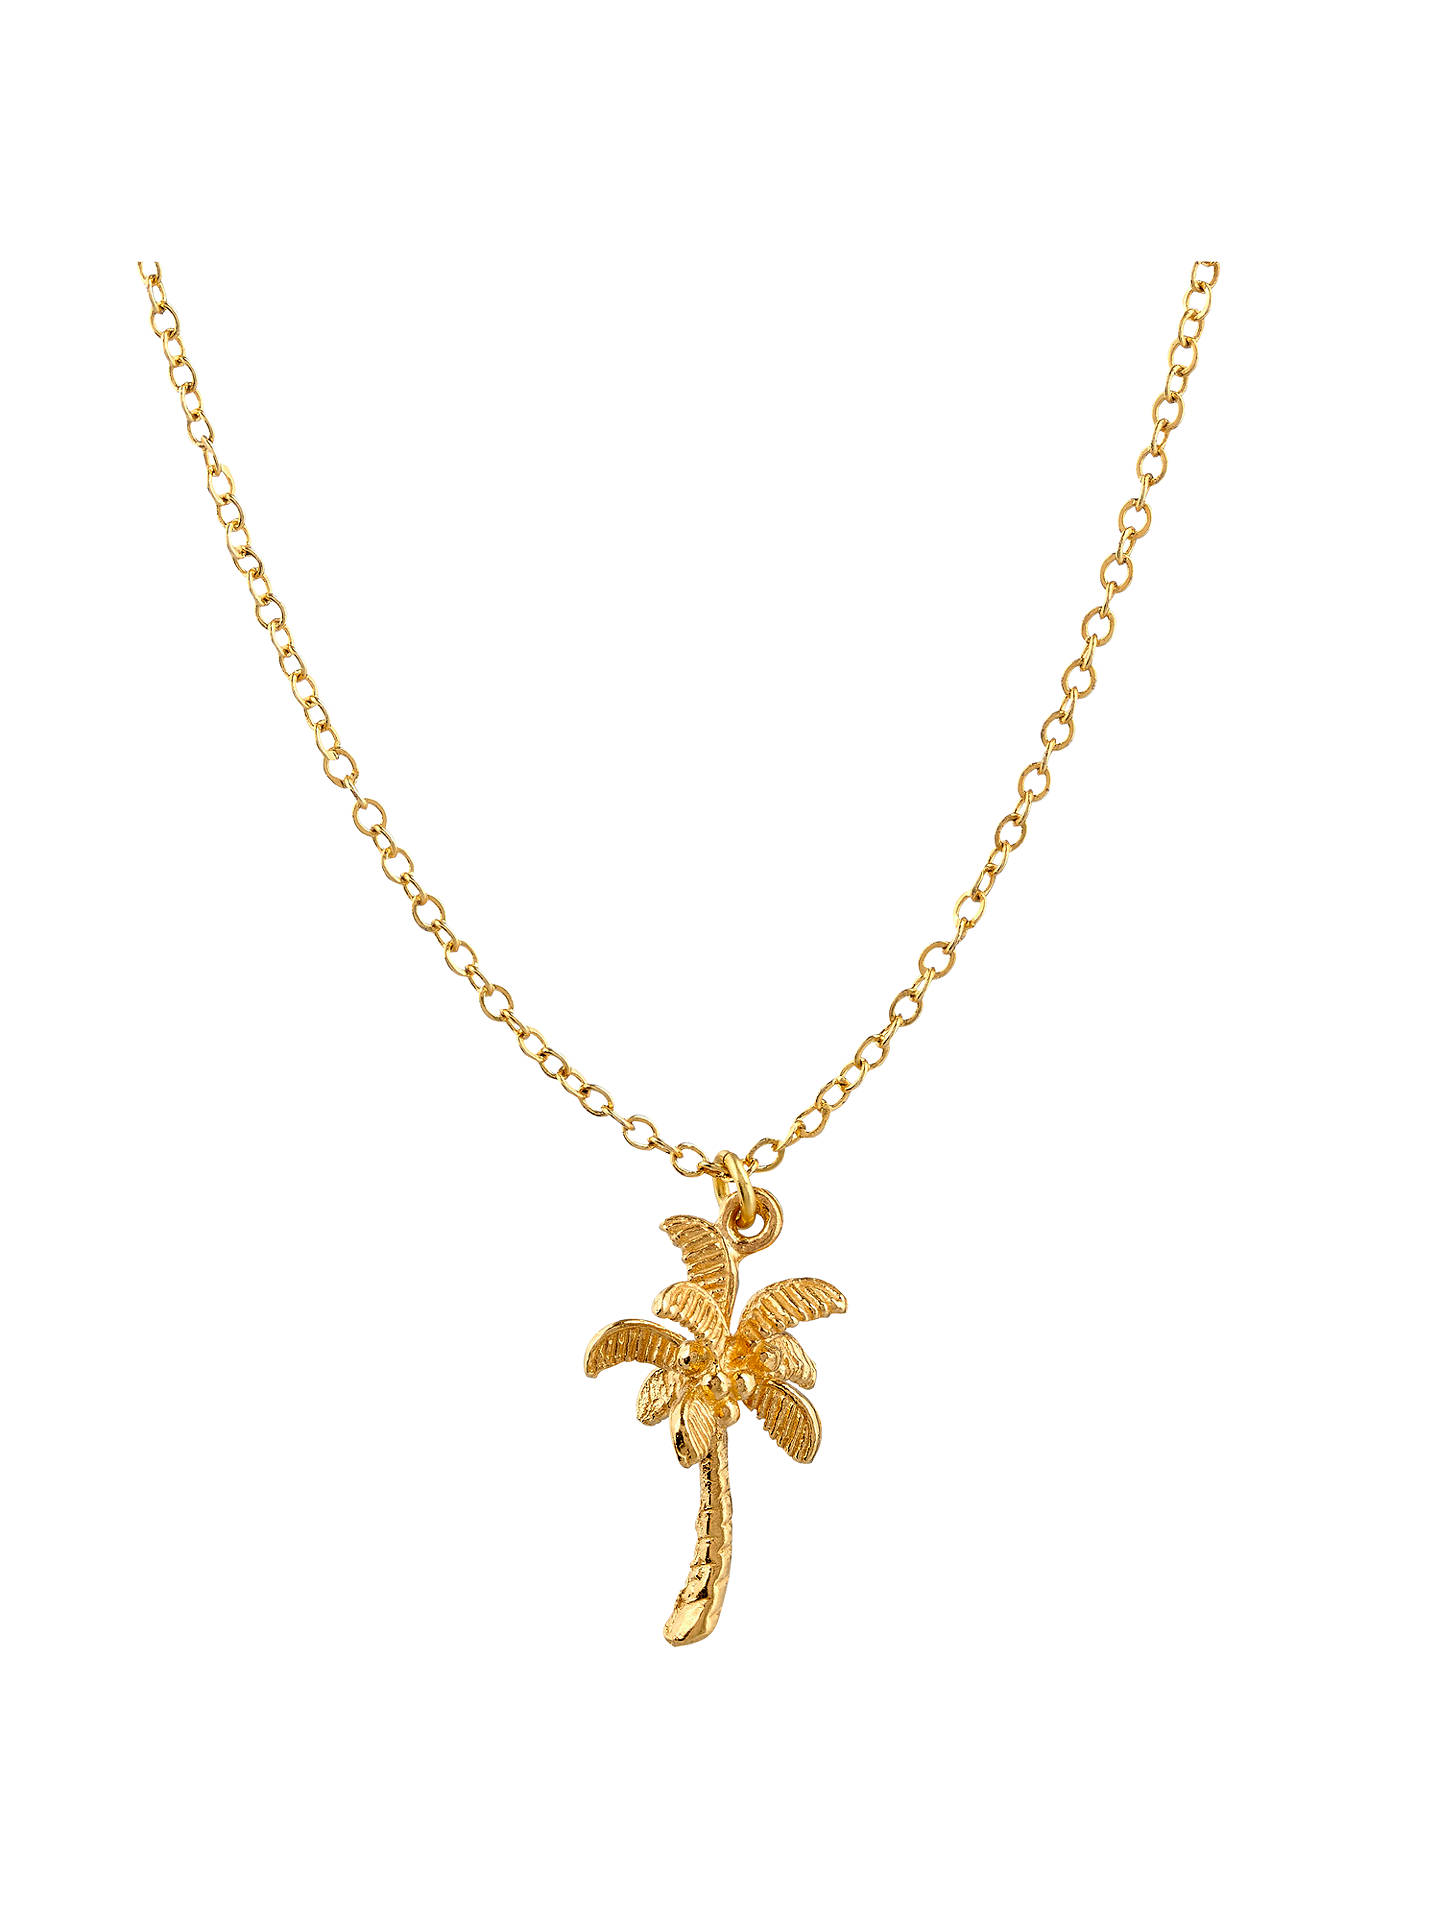 Mirabelle Palm Tree Pendant Chain Necklace, Gold at John Lewis & Partners